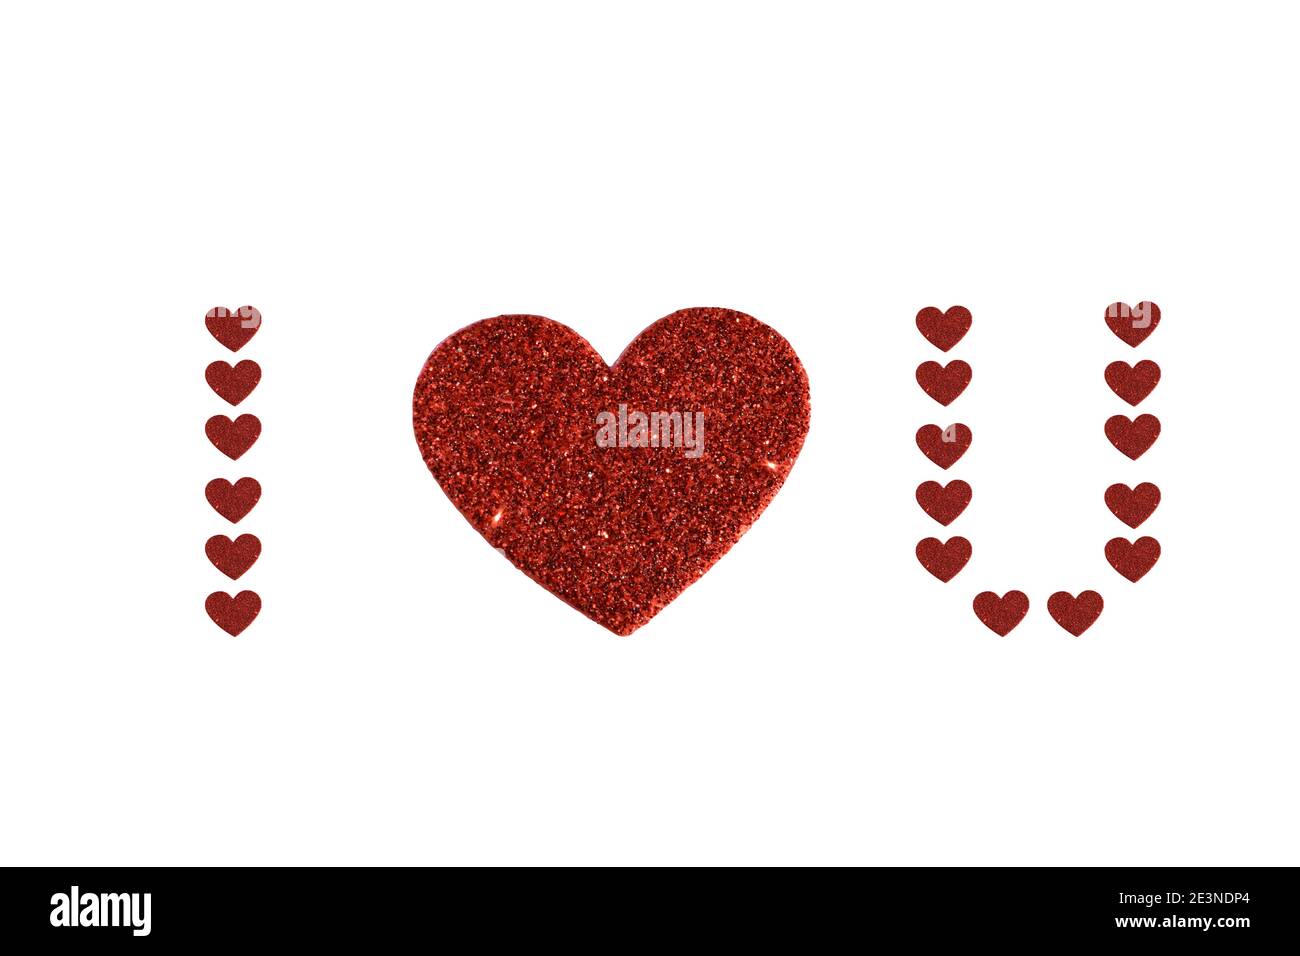 Love heart emoji Cut Out Stock Images & Pictures - Alamy